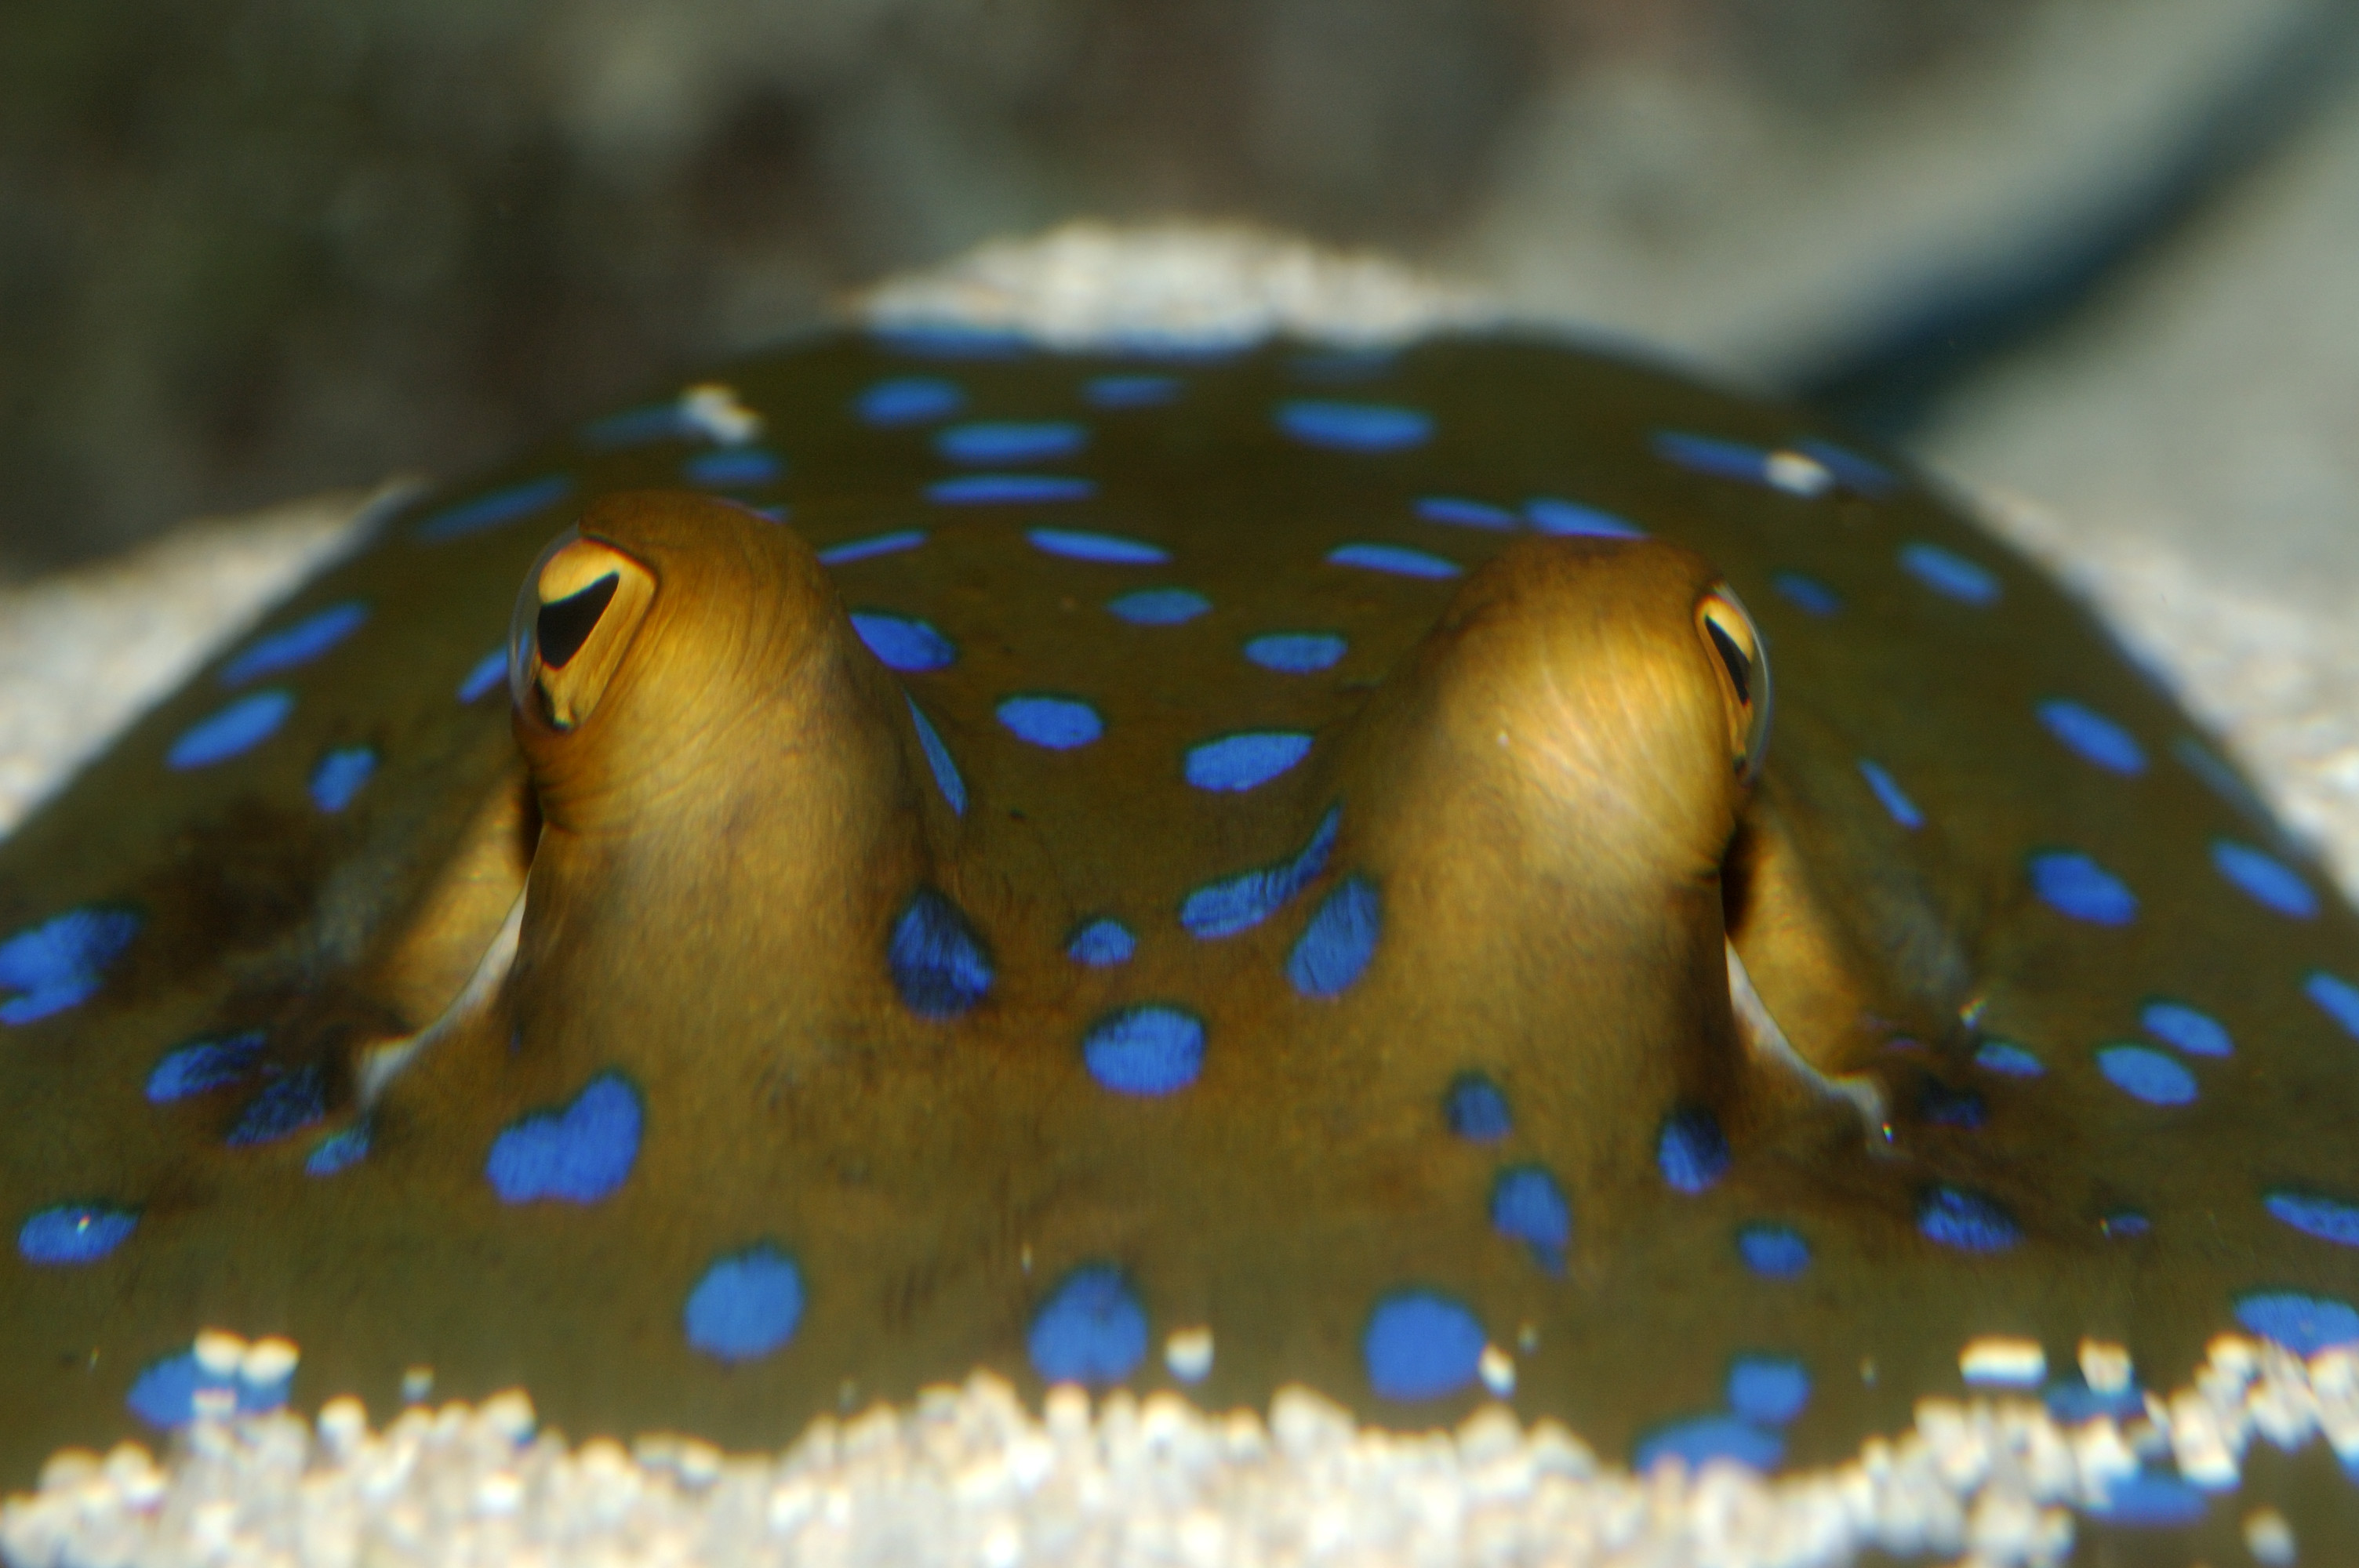 Blue Spotted Ray at SEA LIFE Manchester